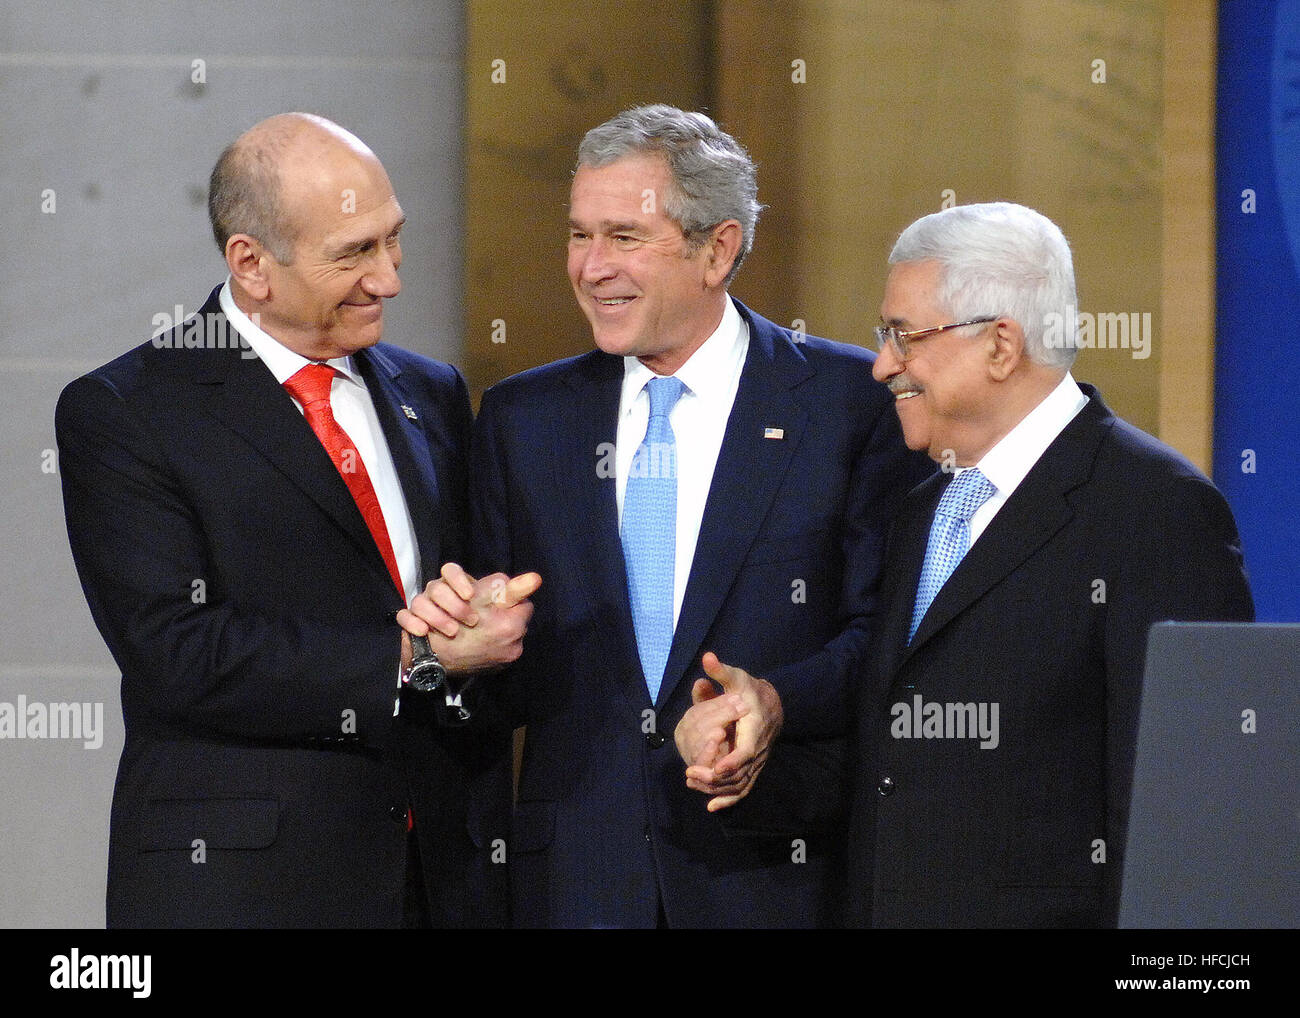 From left, Israeli Prime Minister Ehud Omert, President George W. Bush, and Palestinian President Mahmoud Abbas shake hands following the President's address to more than 50 counties and international organizations at the Annapolis Conference in the Naval Academy's Memorial Hall in Annapolis, Md., Nov. 27,2007.  Attendees included 'the Quartet,' made up of the United Nations, European Union, Russia and the United States; members of the Arab League Follow-on Committee, the Group of Eight major industrialized nations, permanent members of the U.N. Security Council, and other key international of Stock Photo